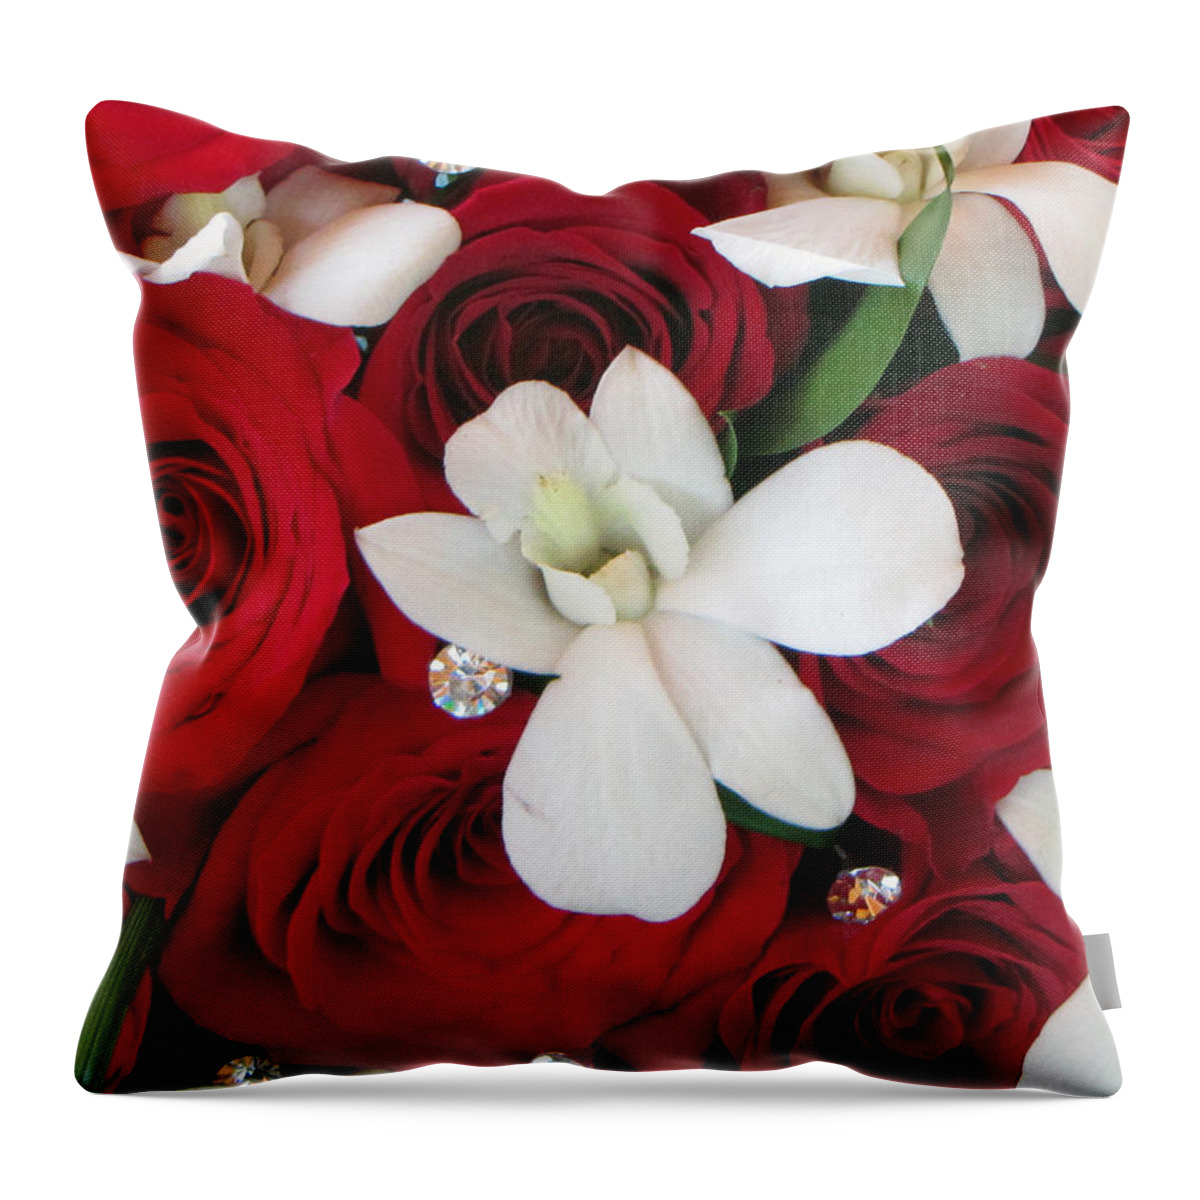 Red Roses Throw Pillow featuring the photograph Anniversary by Tikvah's Hope